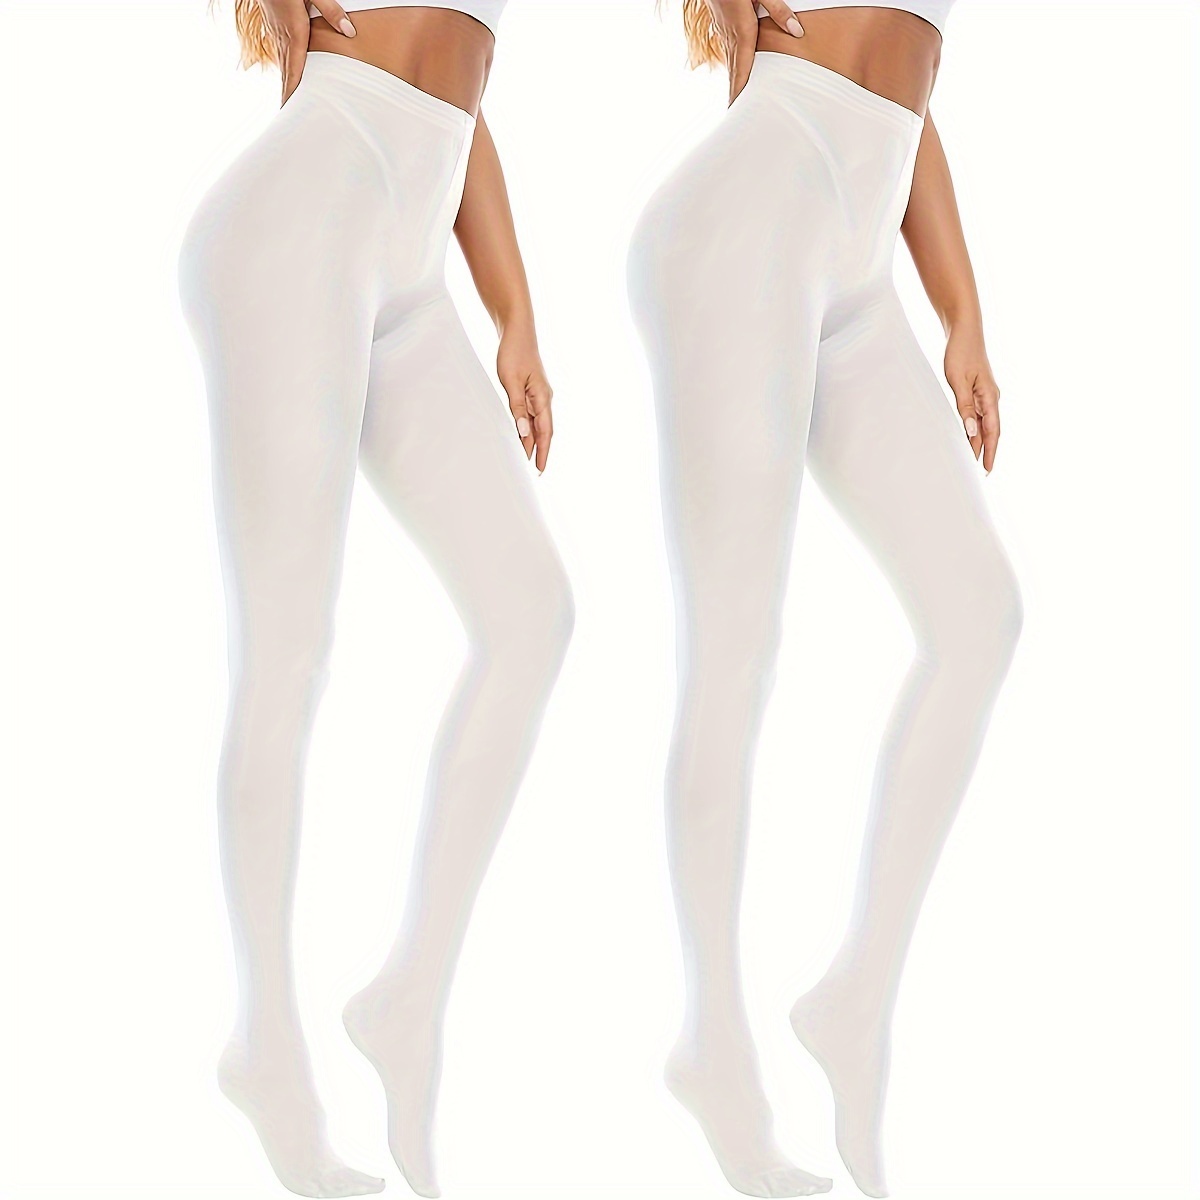 White Tights for Women